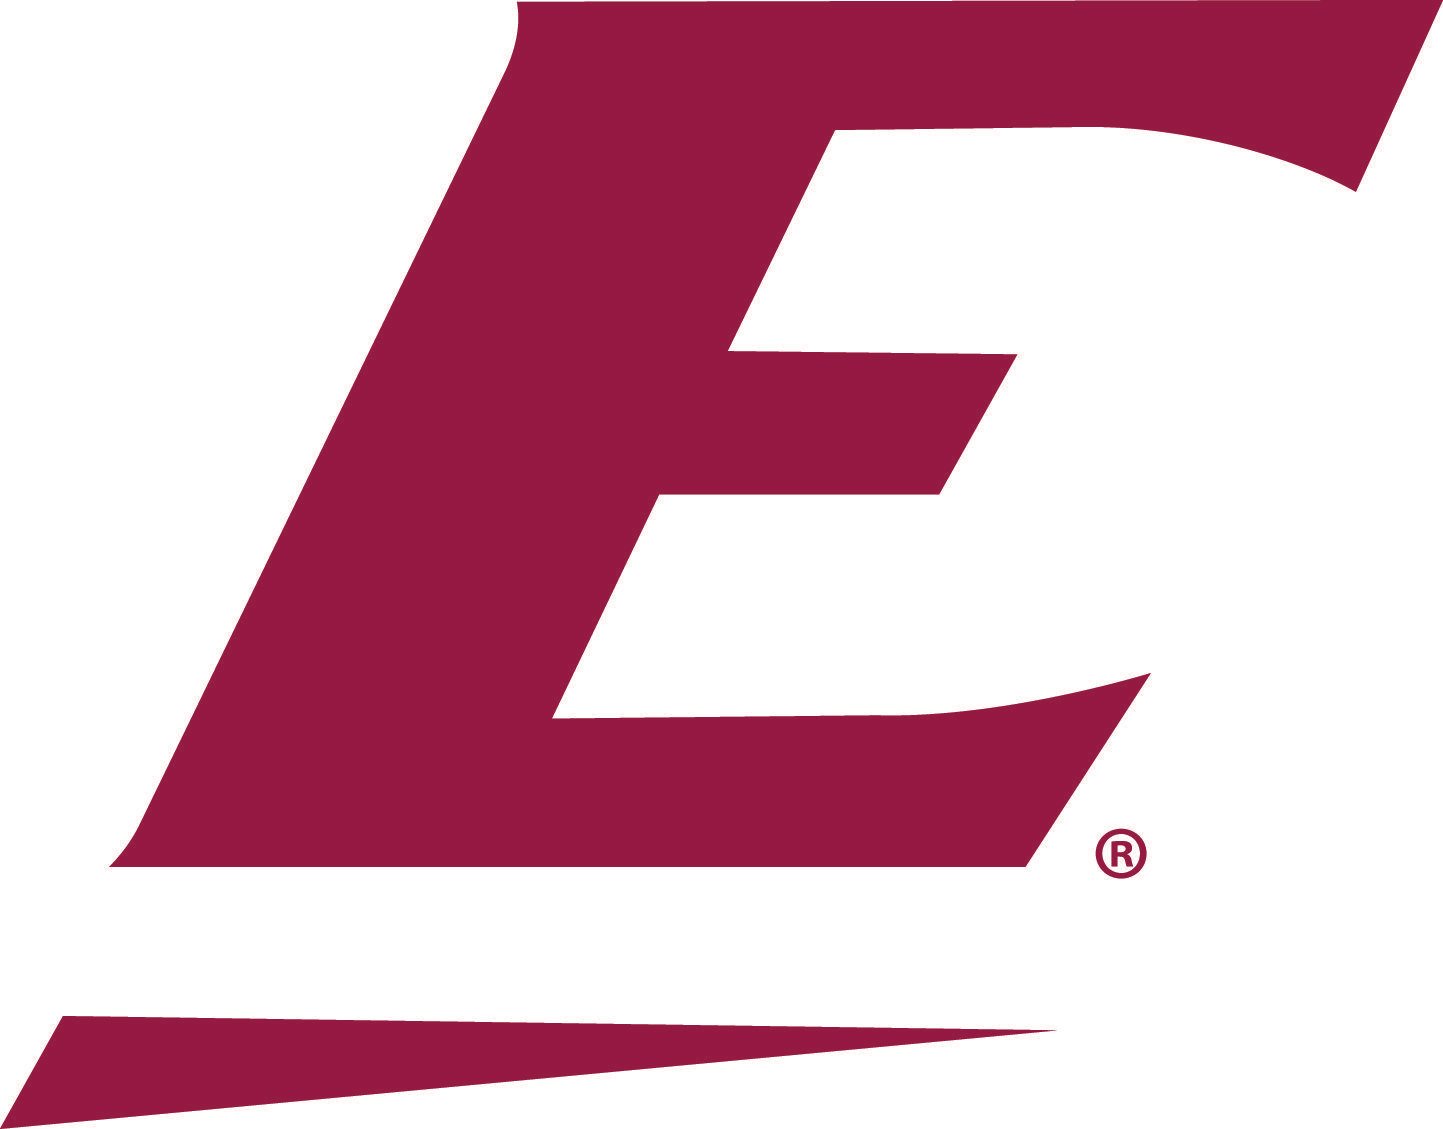 EKU Logo - EKU the second choice in OVC football poll in vote of league coaches ...